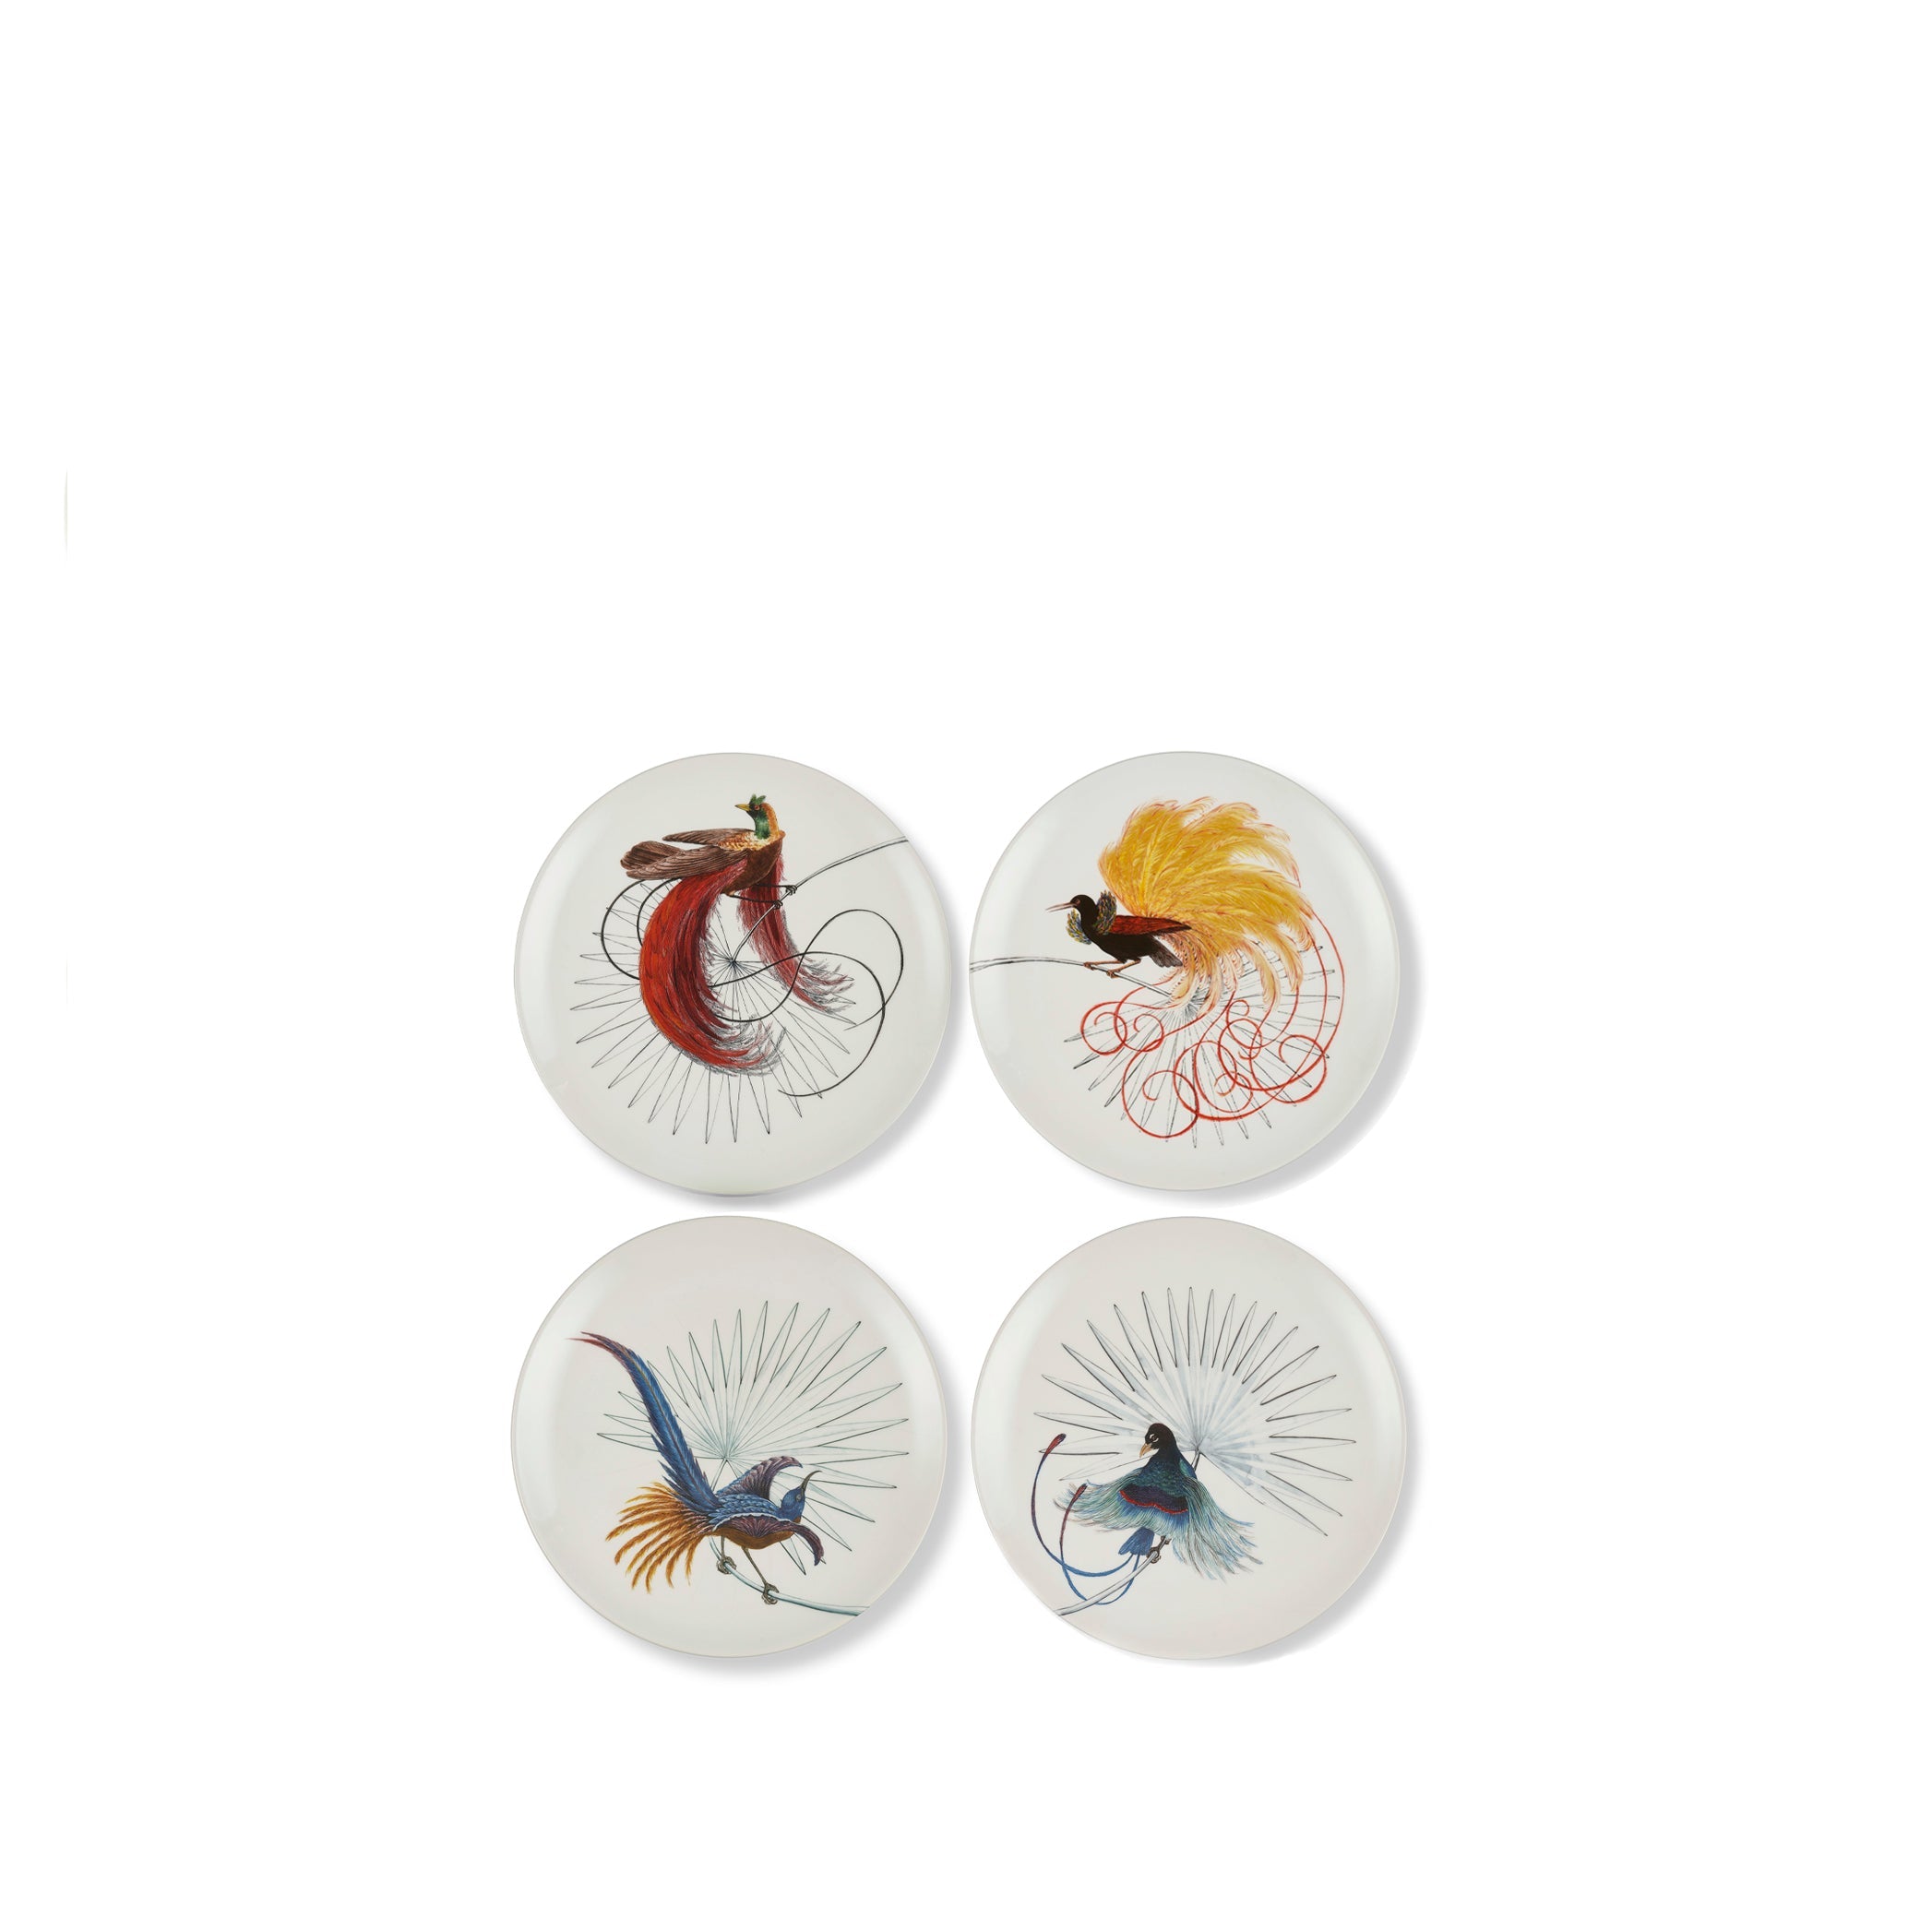 Bird Of Paradise Dinner Plate in White With Yellow & Black Bird, 25cm